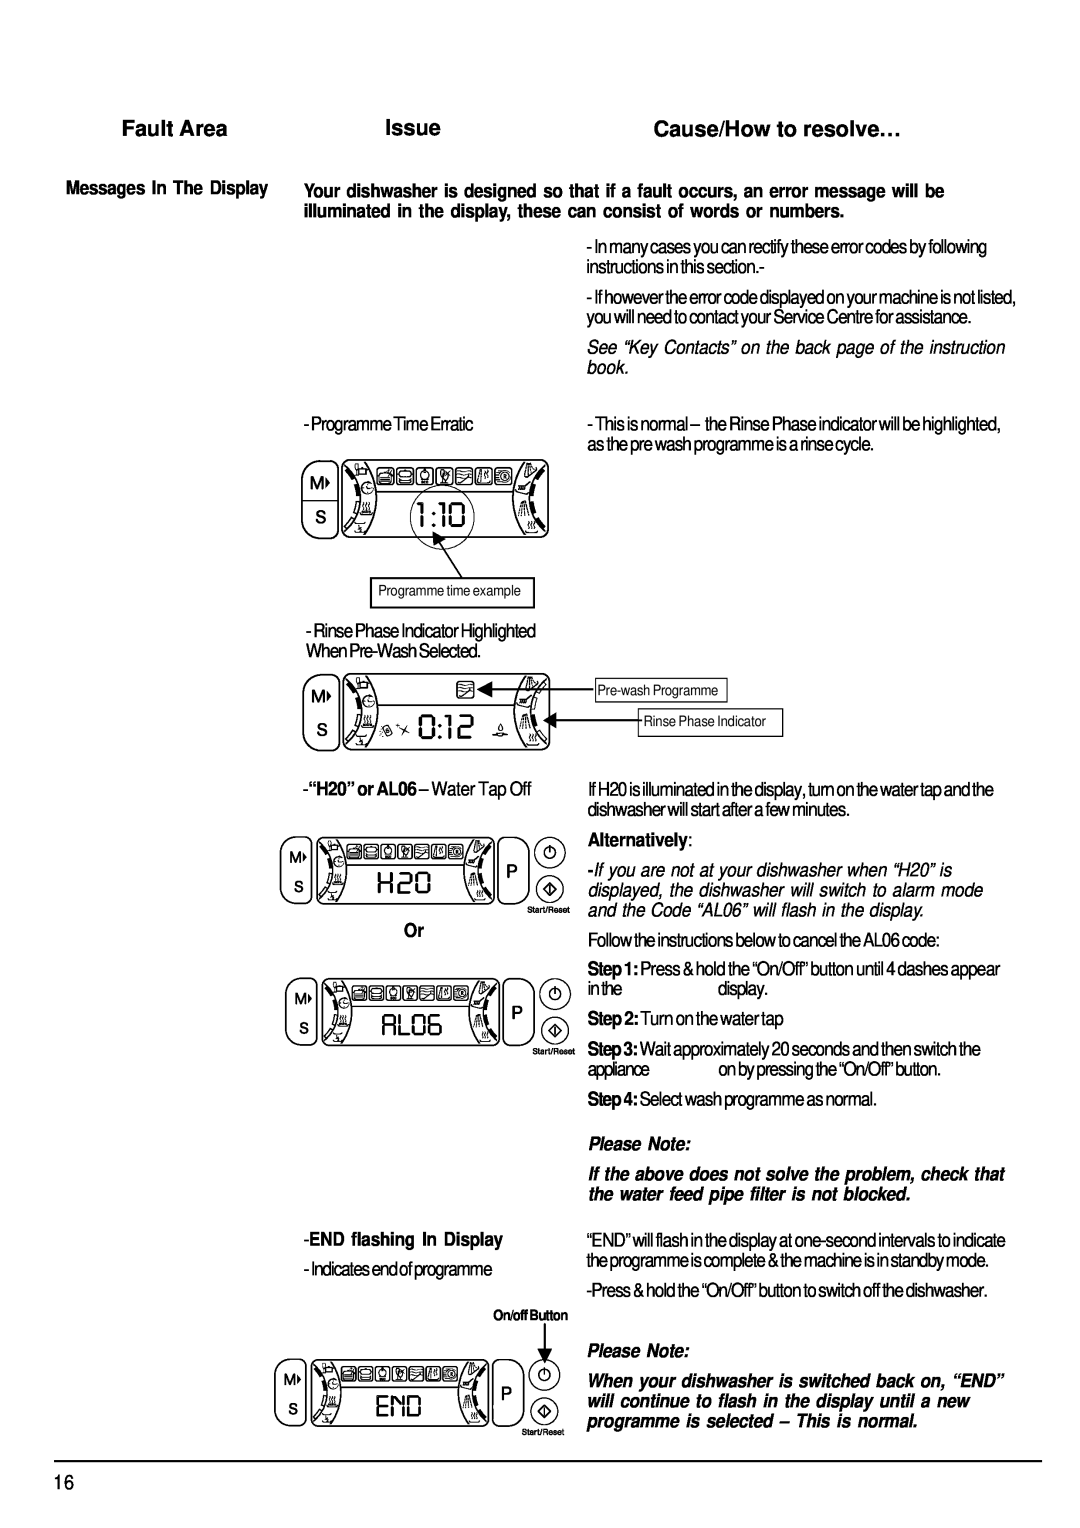 Hotpoint FDW85 Fault Area, Issue, Messages In The Display, Cause/How to resolve…, Or ENDflashing In Display, Alternatively 